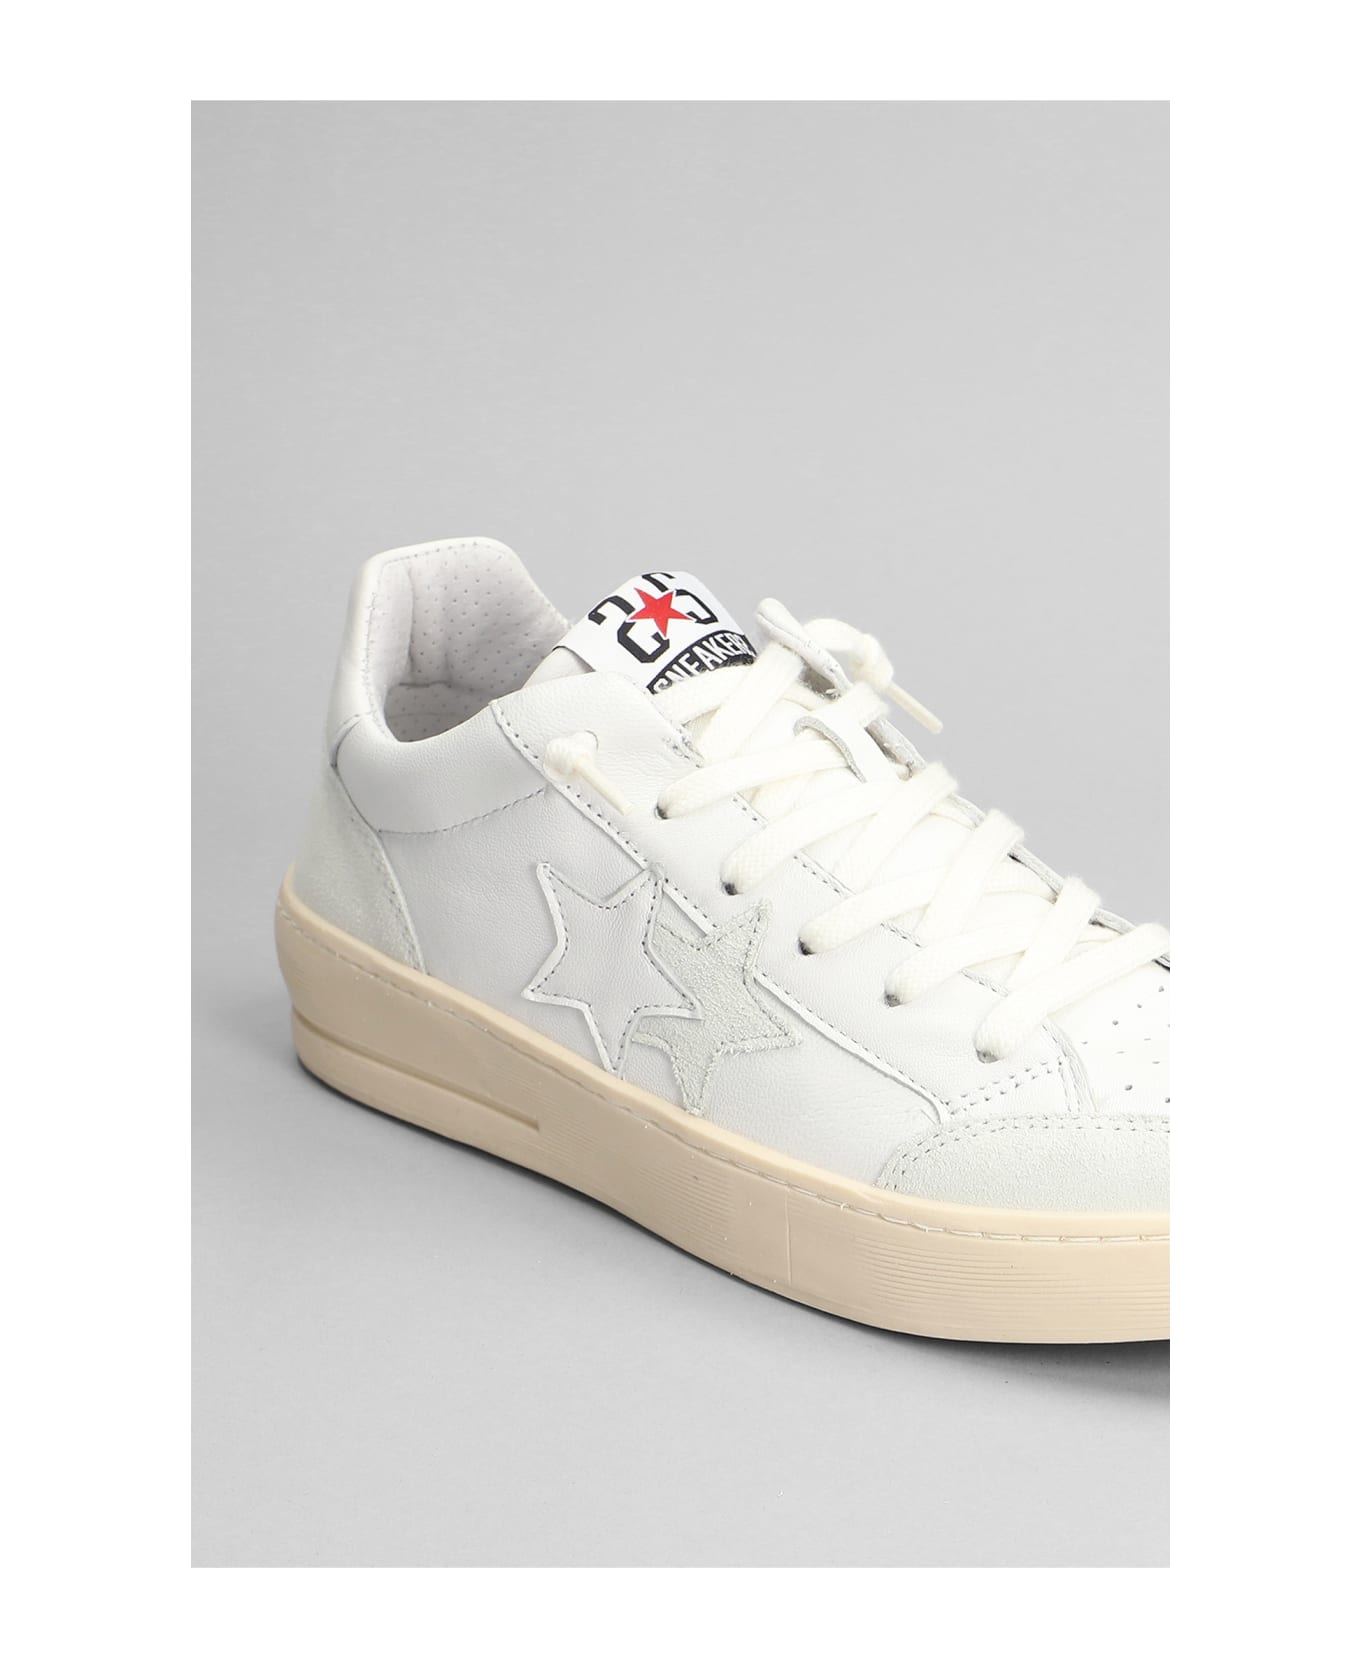 2Star New Star Sneakers In White Suede And Leather - white スニーカー